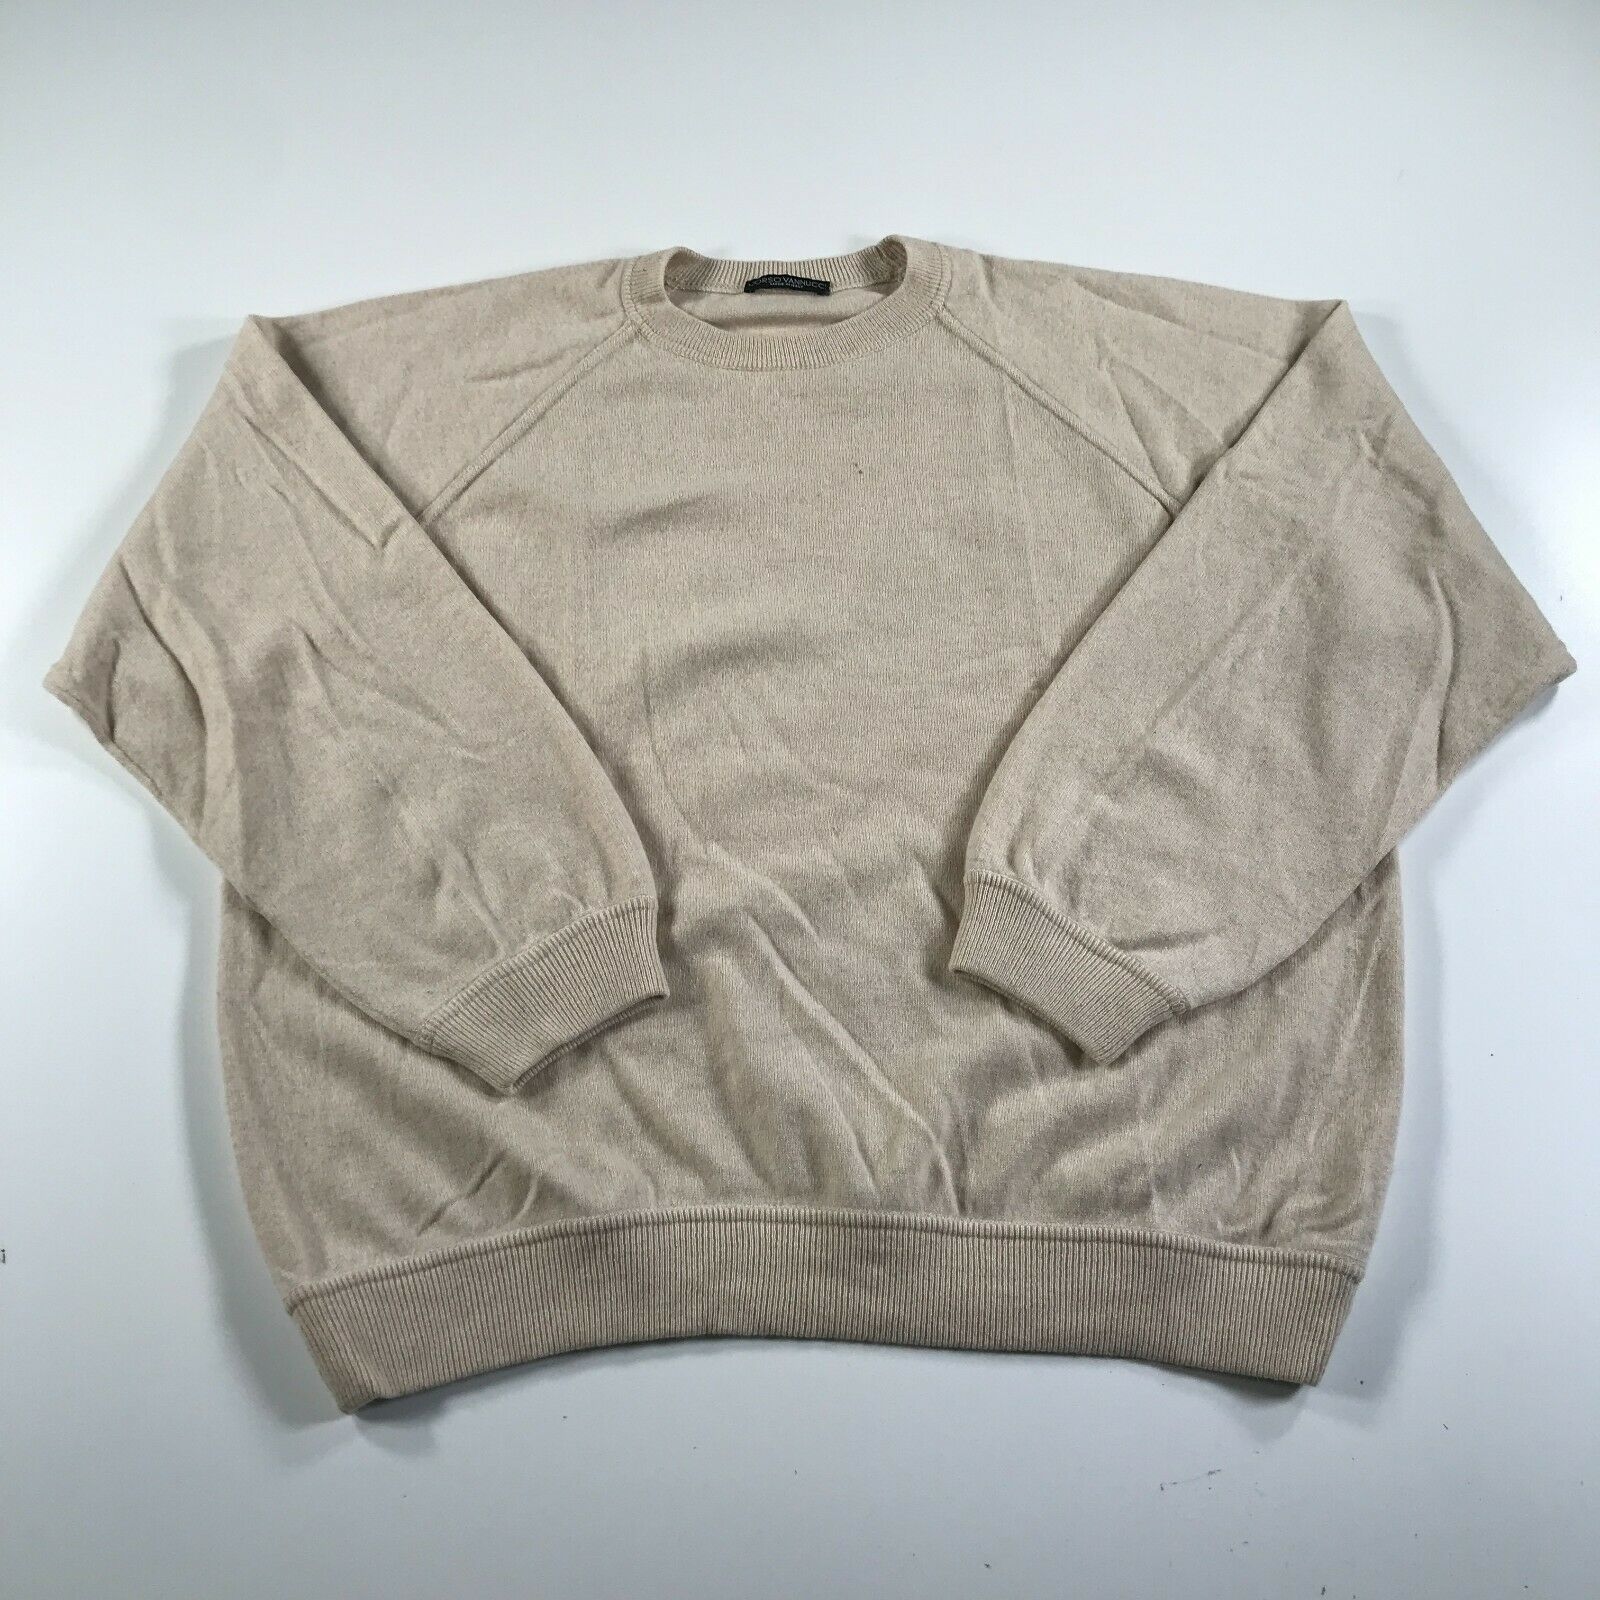 Primary image for Corso Vannucci Cashmere Sweater Mens 52 XL Beige Crew Neck Long Sleeve Italy